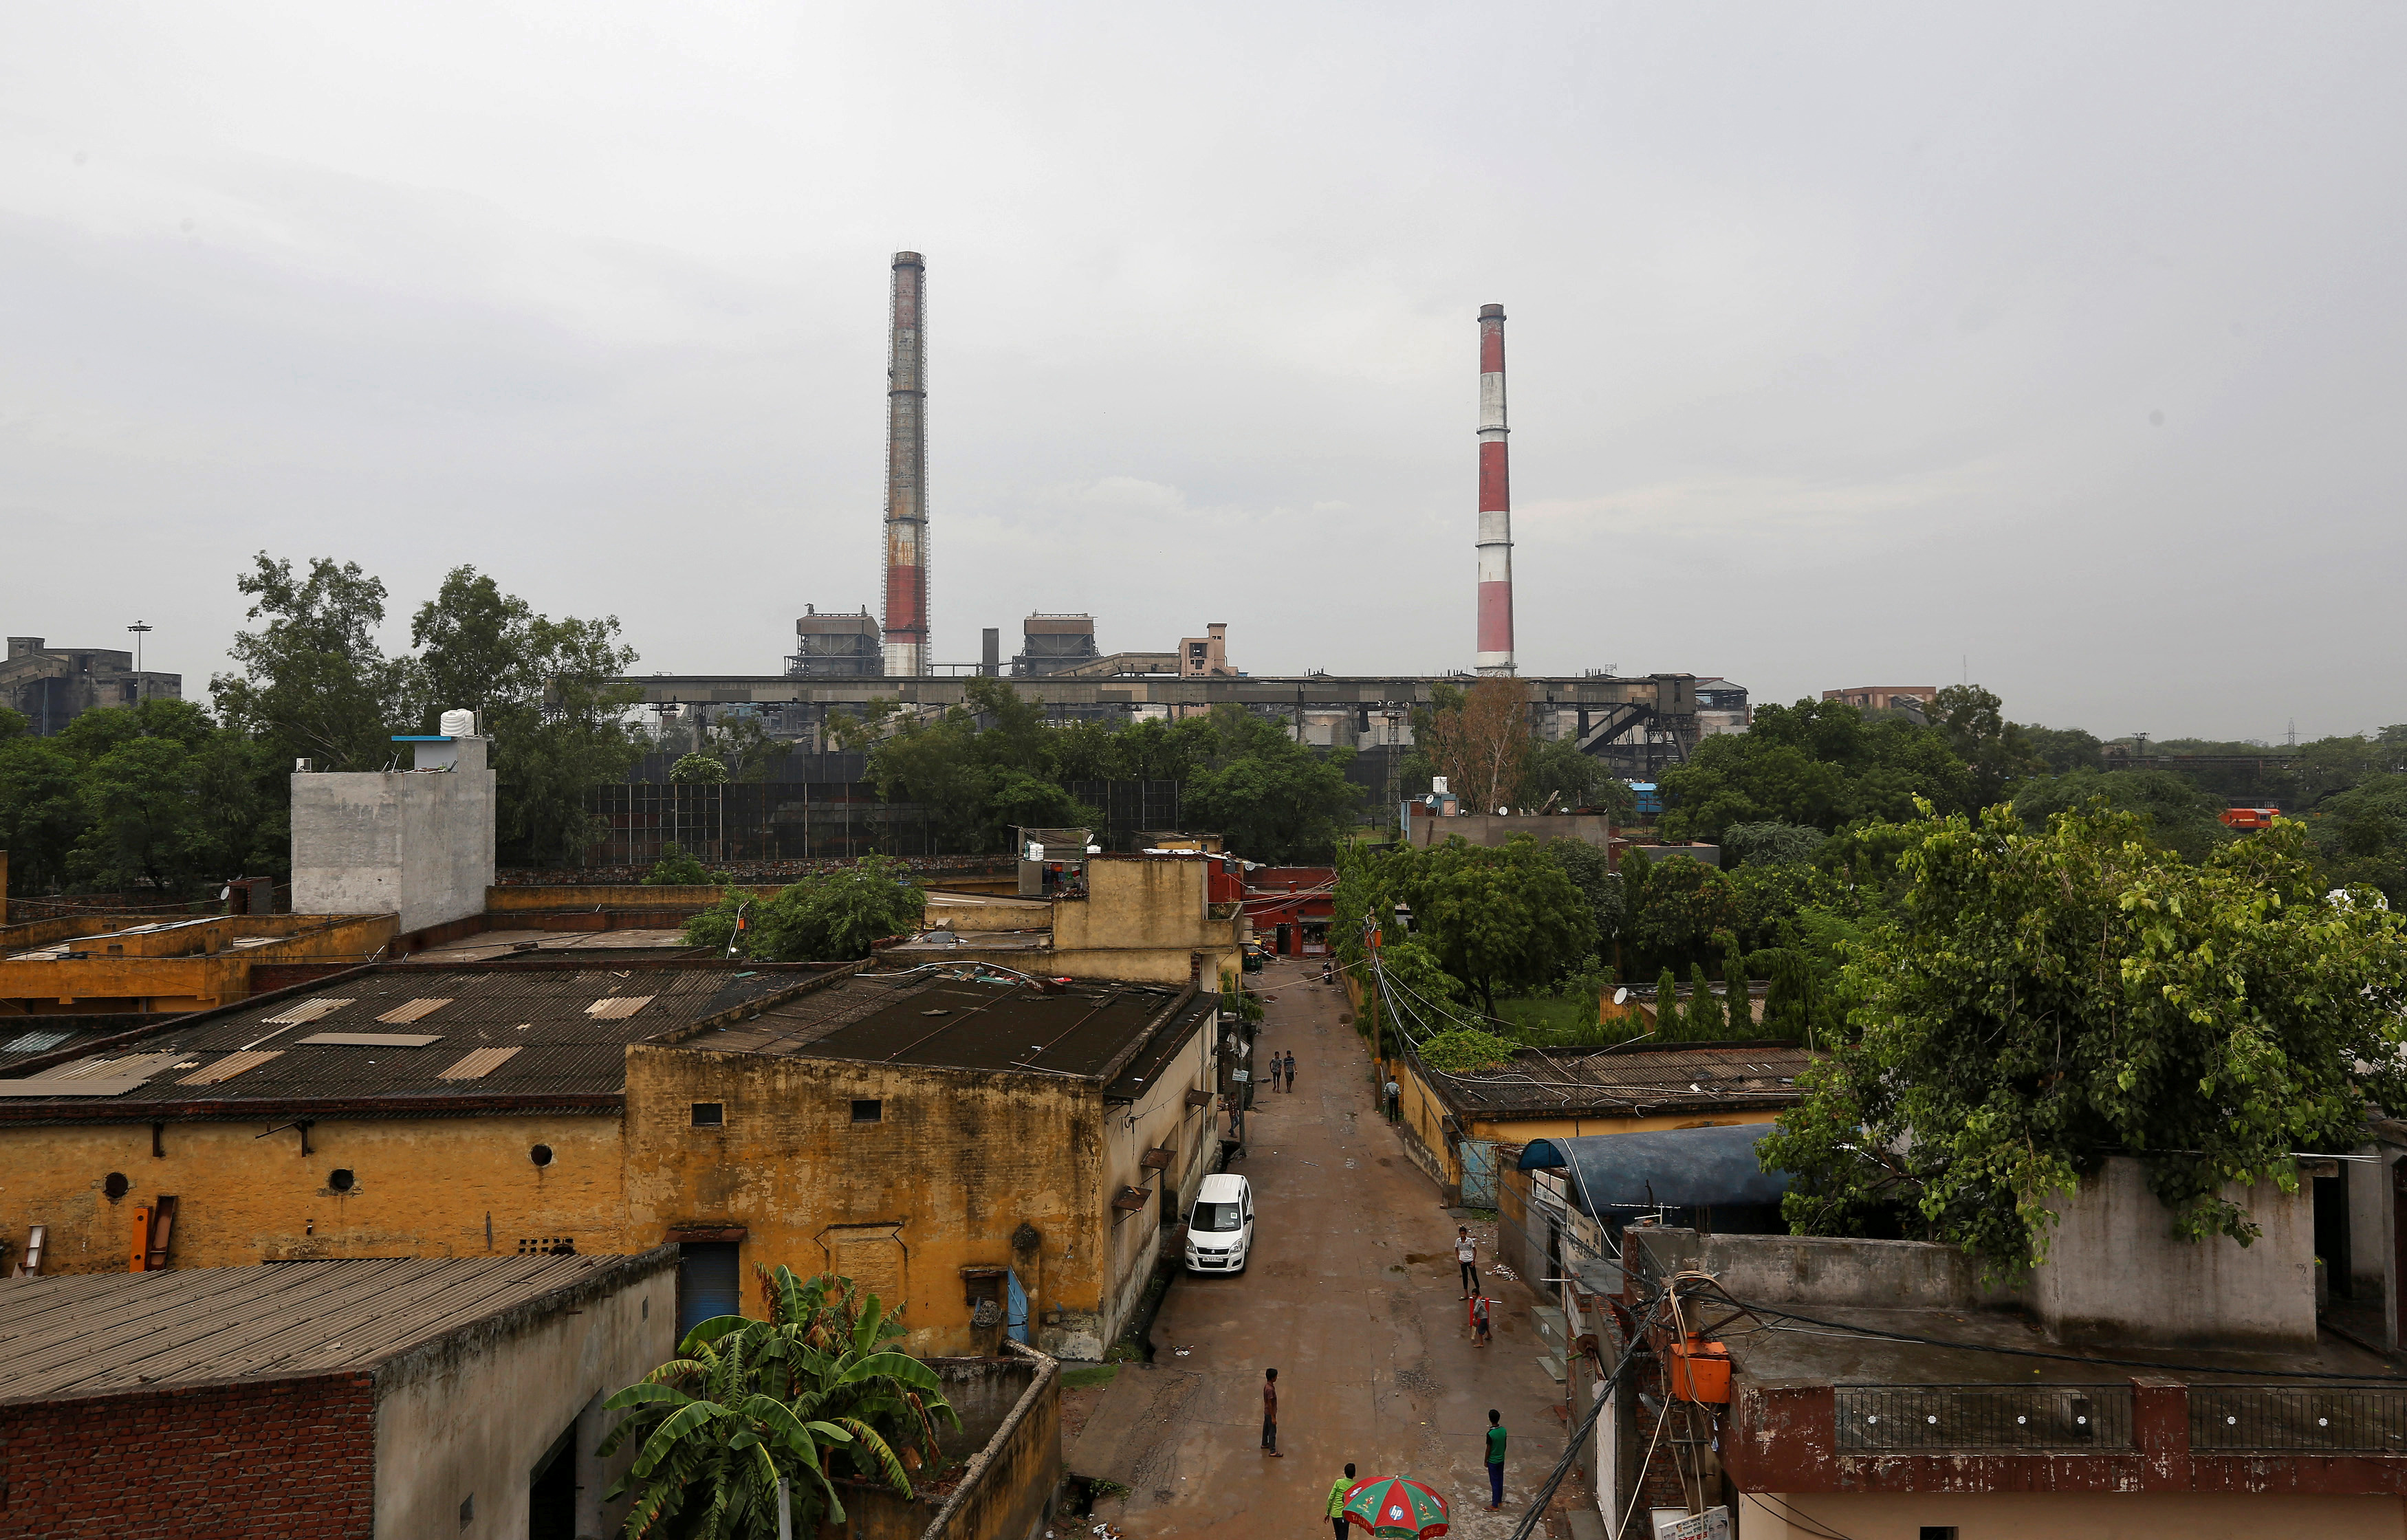 Chimneys of a coal-fired power plant are pictured in New Delhi